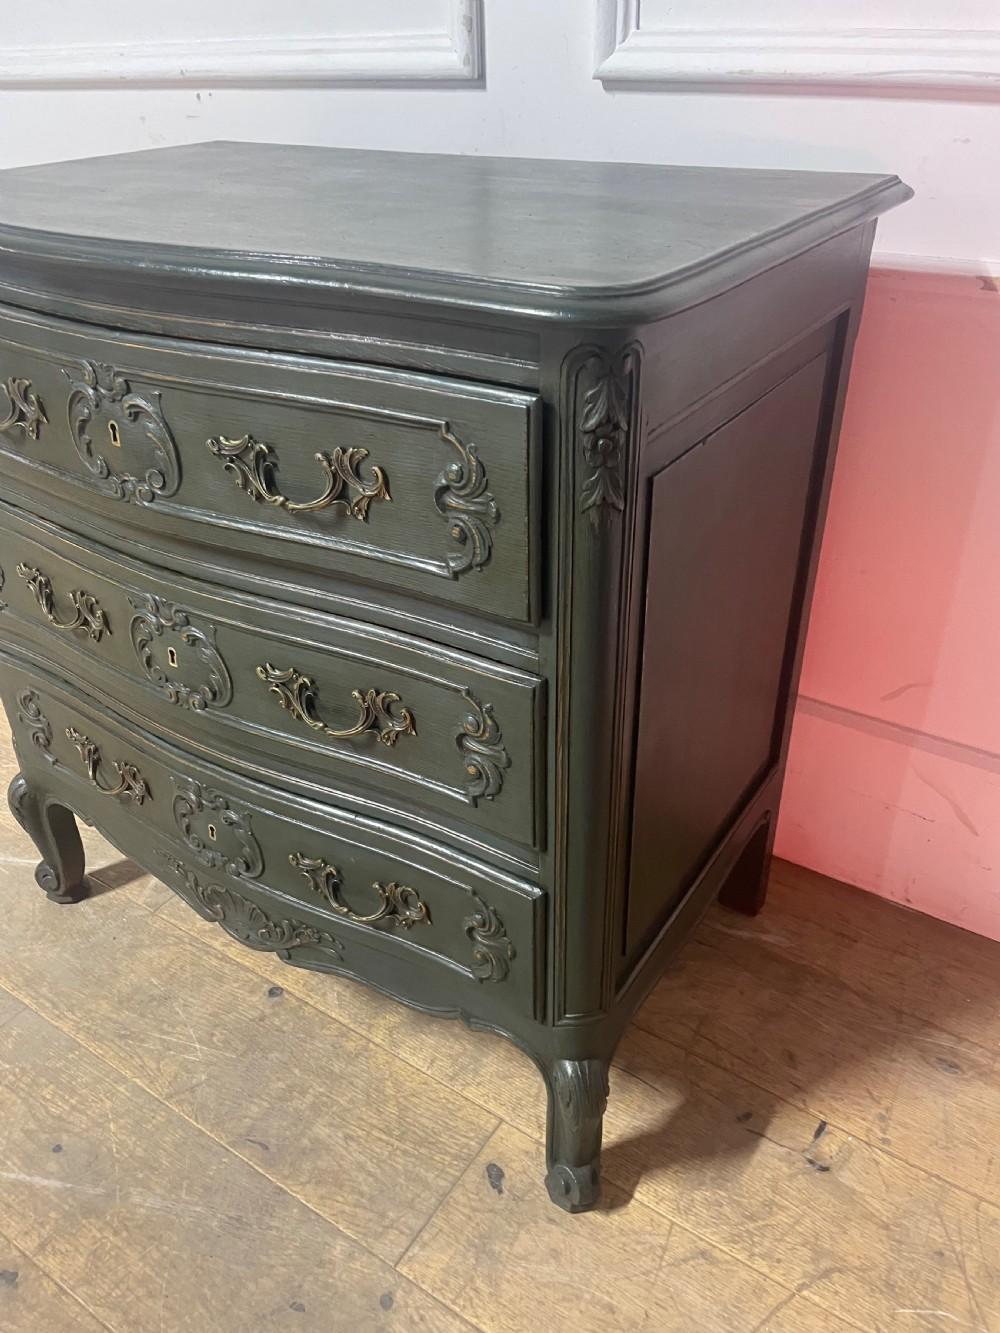 Charming , neat sized dark green painted French chest of drawers
Circa 1900 with original solid brass handles , working locks and a key
Height 86 cms or 34 inches
Width 86 cms or 34 inches
Depth 56 cms or 22 inches